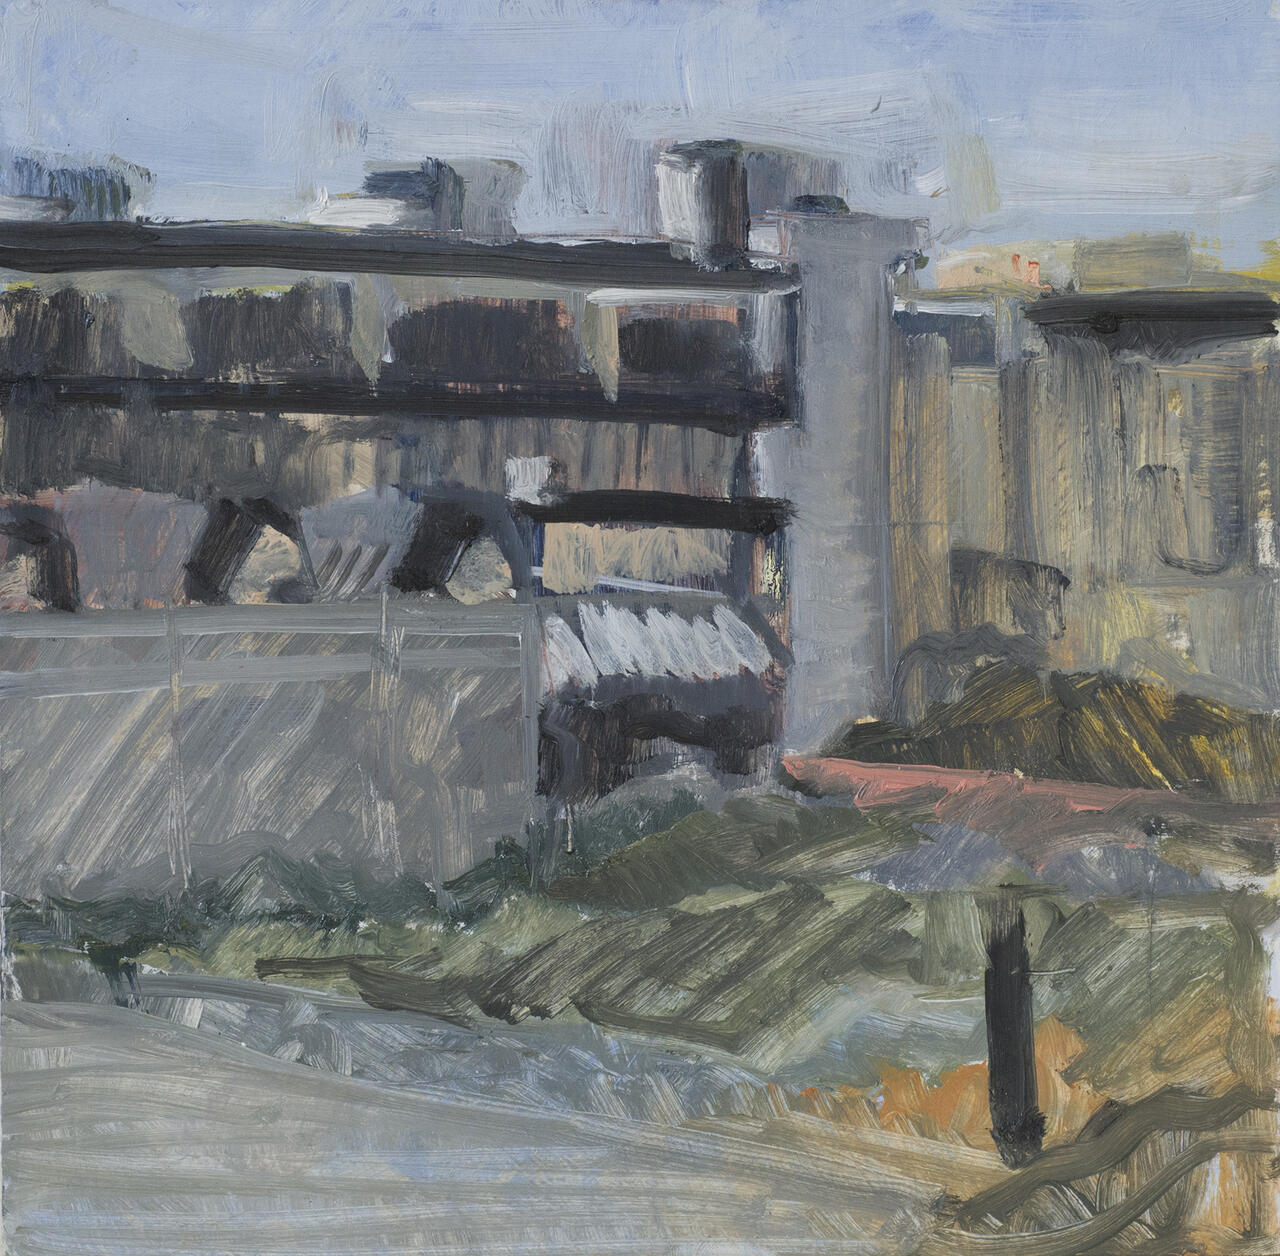 Textural painting of buildings during the daytime.